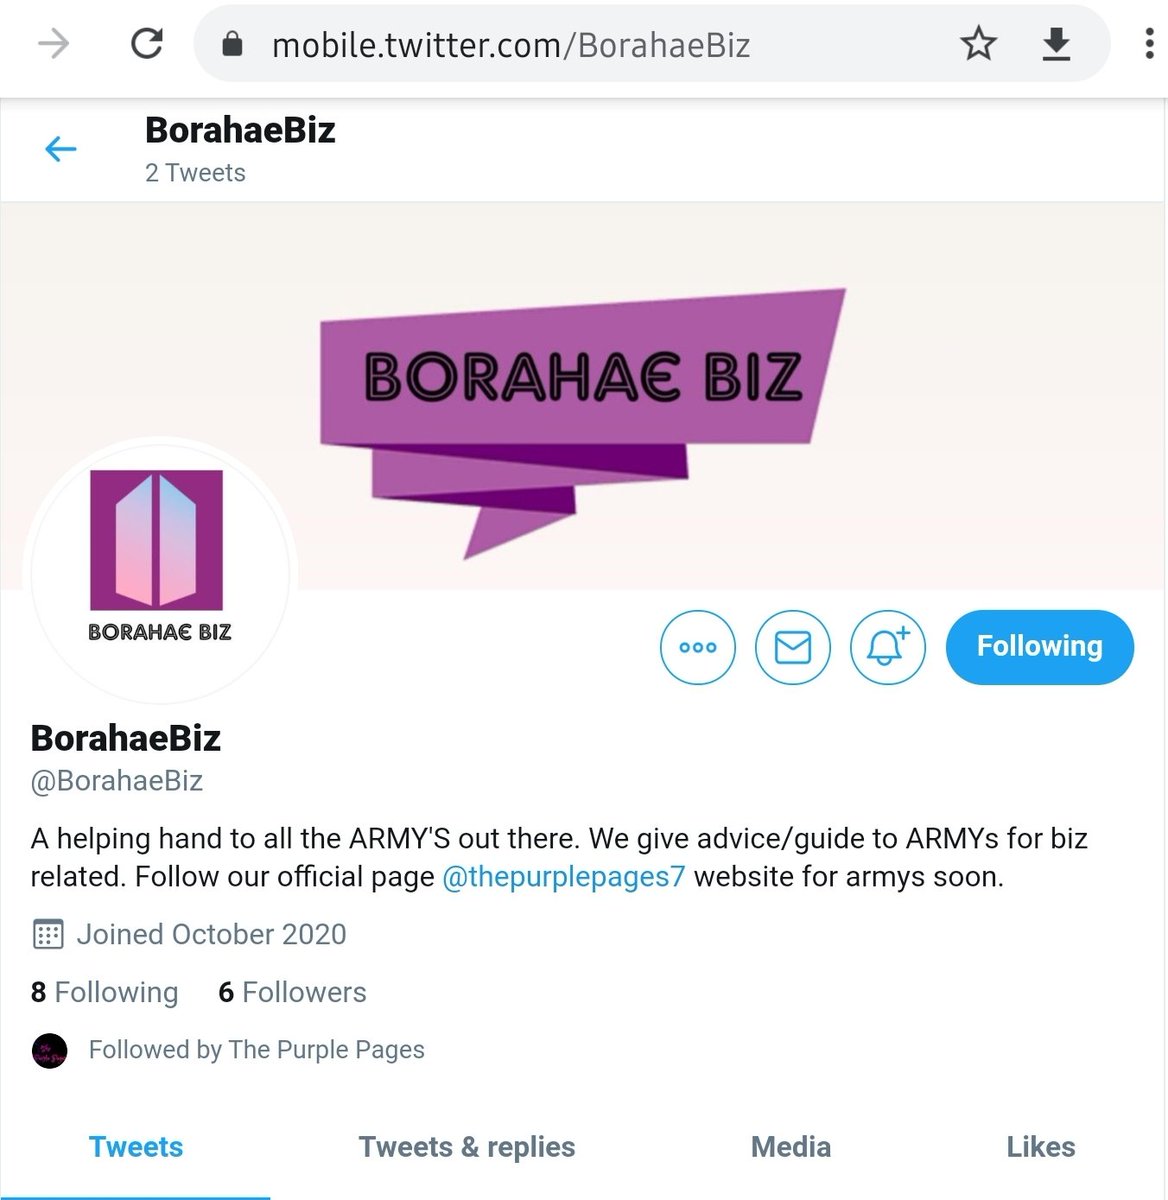 ARMY now have their own Free Purple Page to advertise their products and services (soon to have a website) -  @thePurplePages7 Want business advice? Our business savvy ARMY got you -  @BorahaeBiz  #BTSARMY  @BTS_twt